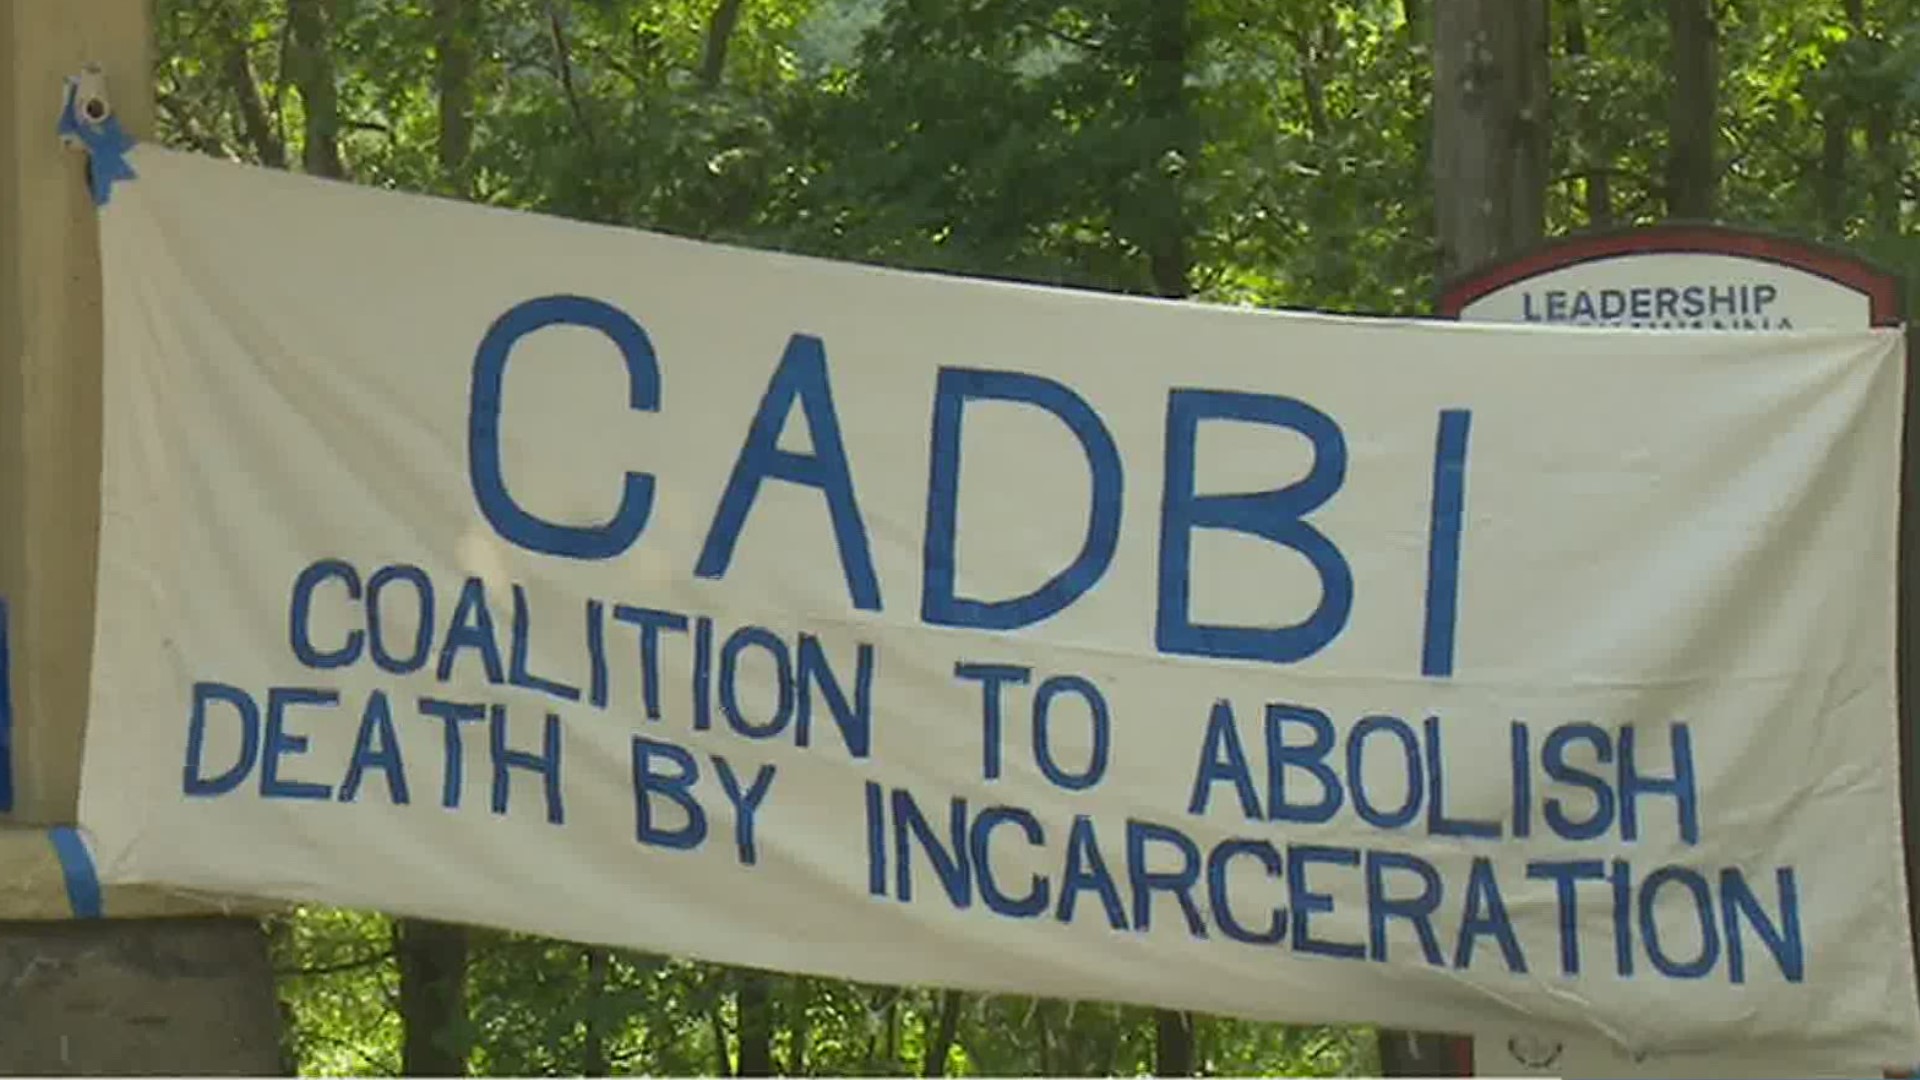 The Coalition to Abolish Death by Incarceration held an event Sunday afternoon in Scranton. Organizers say they hope to one day end harsh sentencing practices.